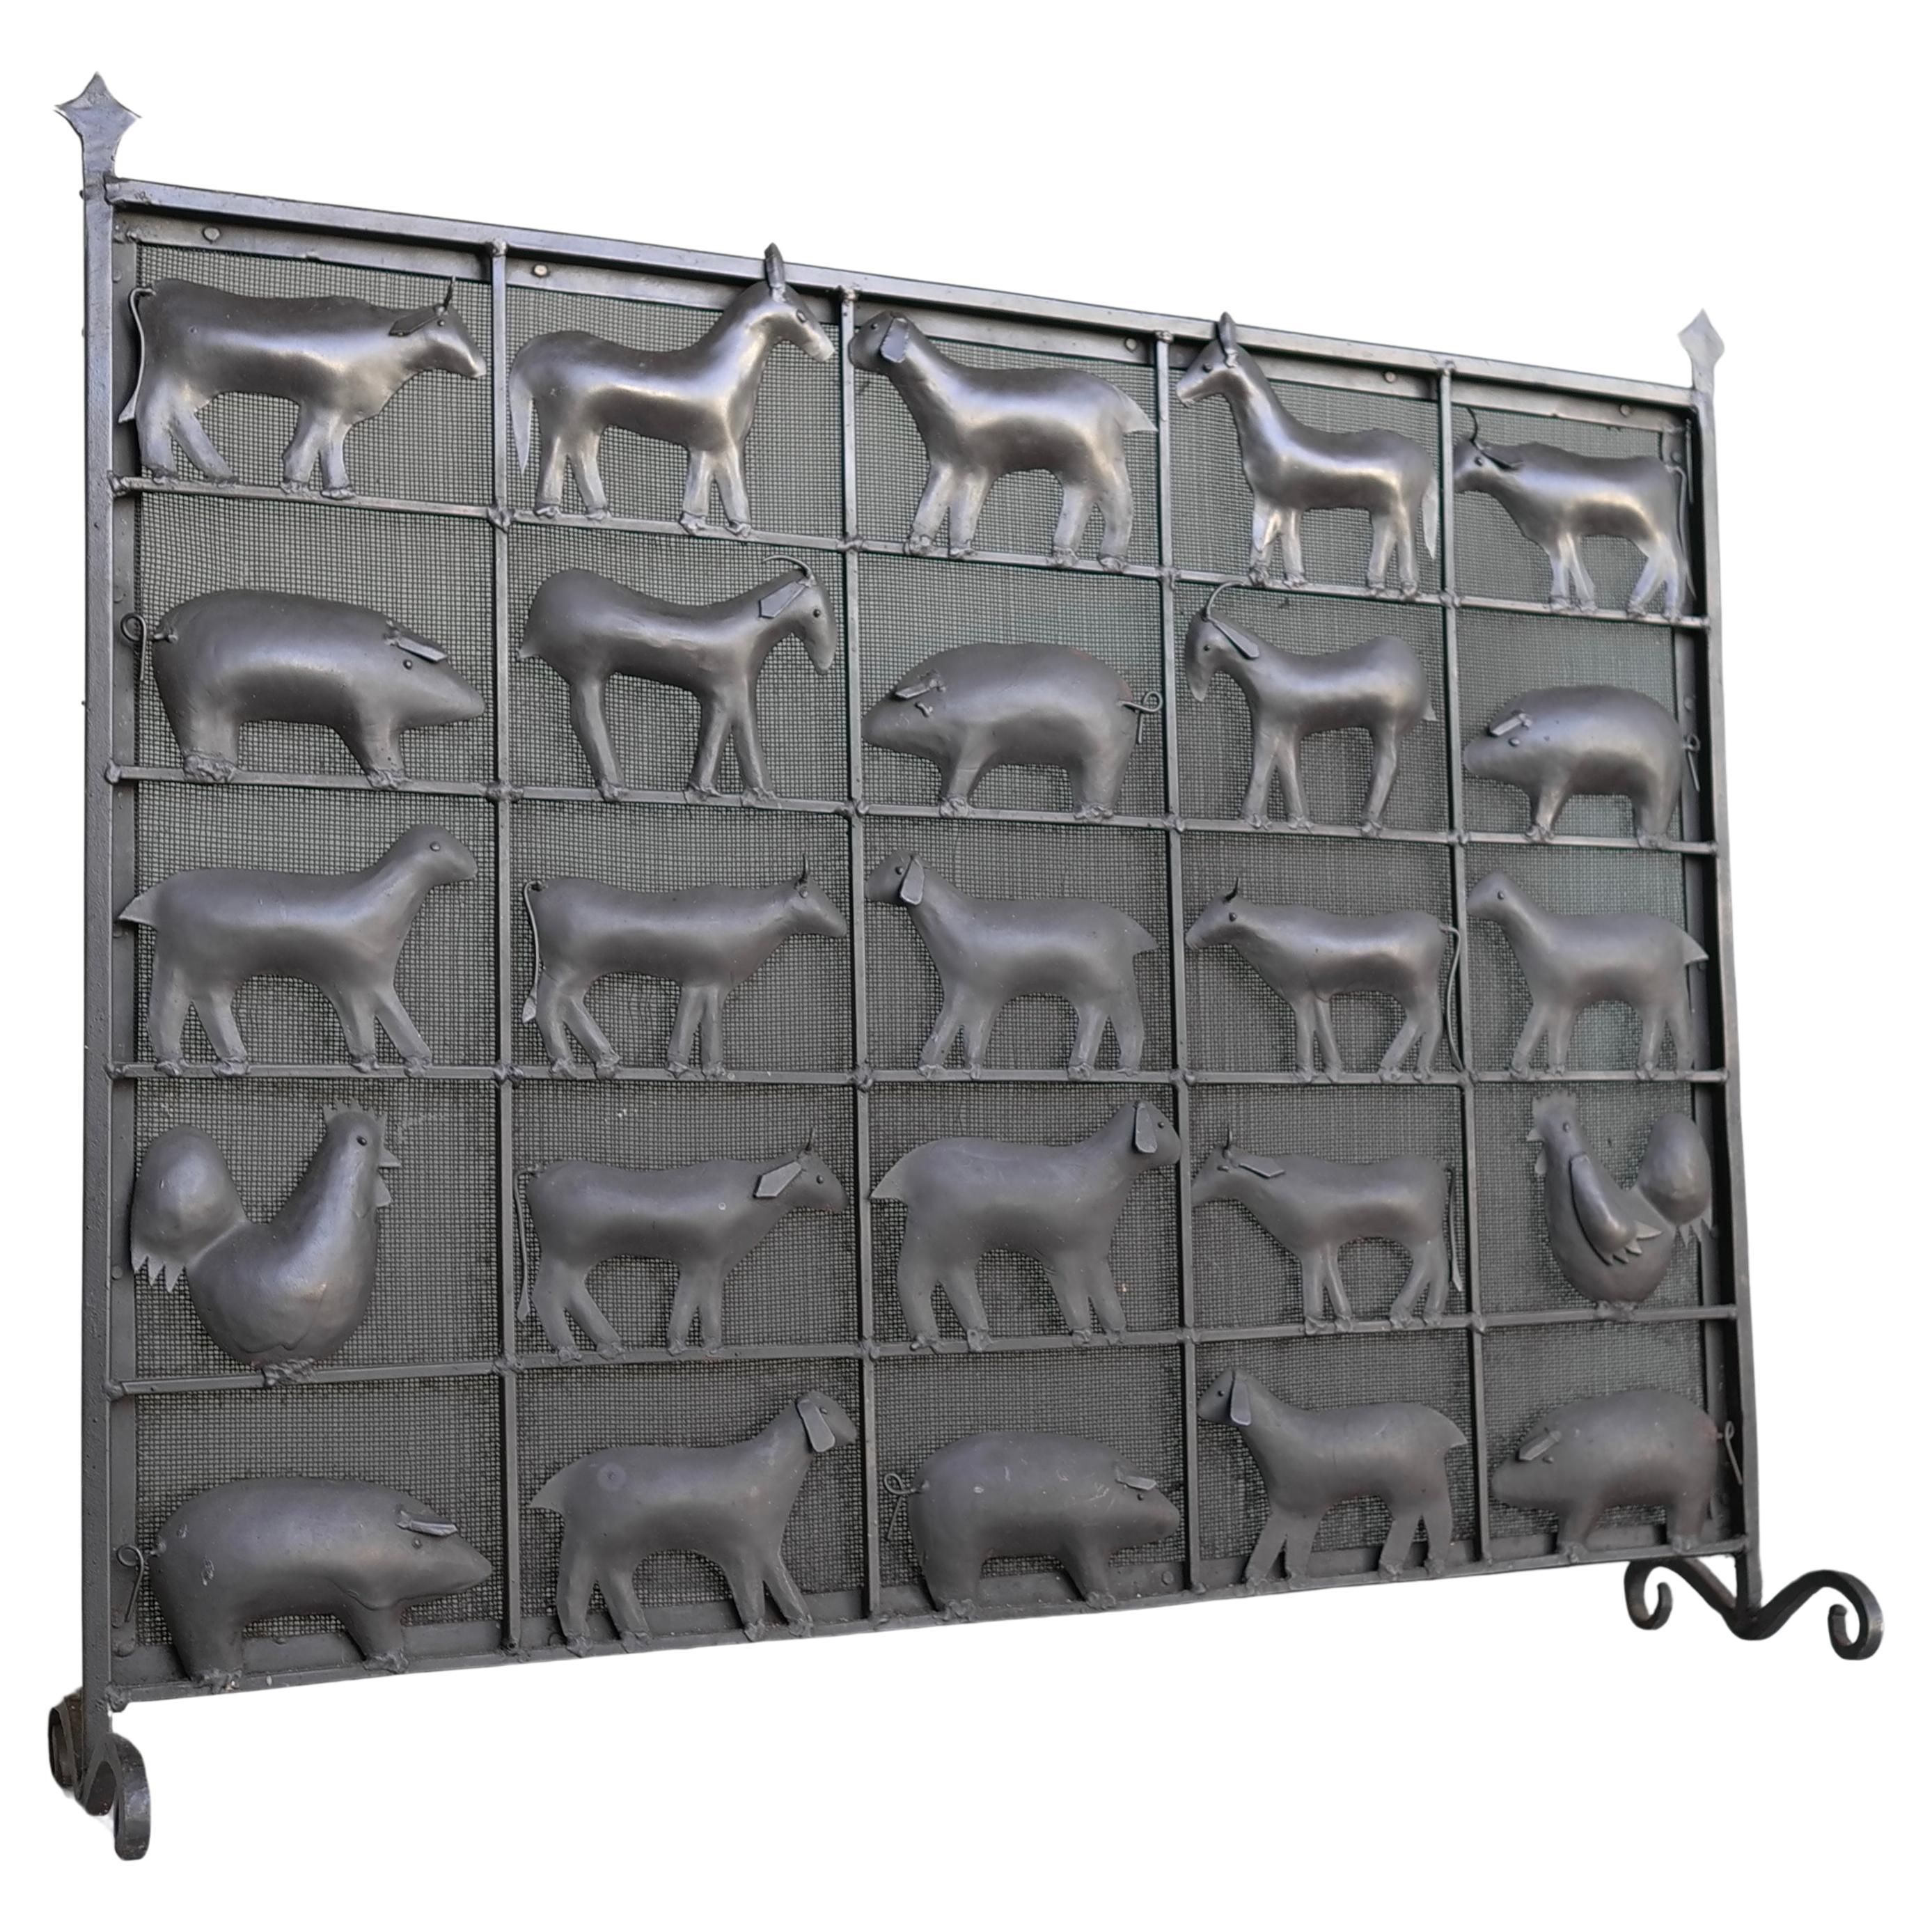 Wrought Iron Animal Fire Screen by Atelier Marolles, France, 1955 For Sale